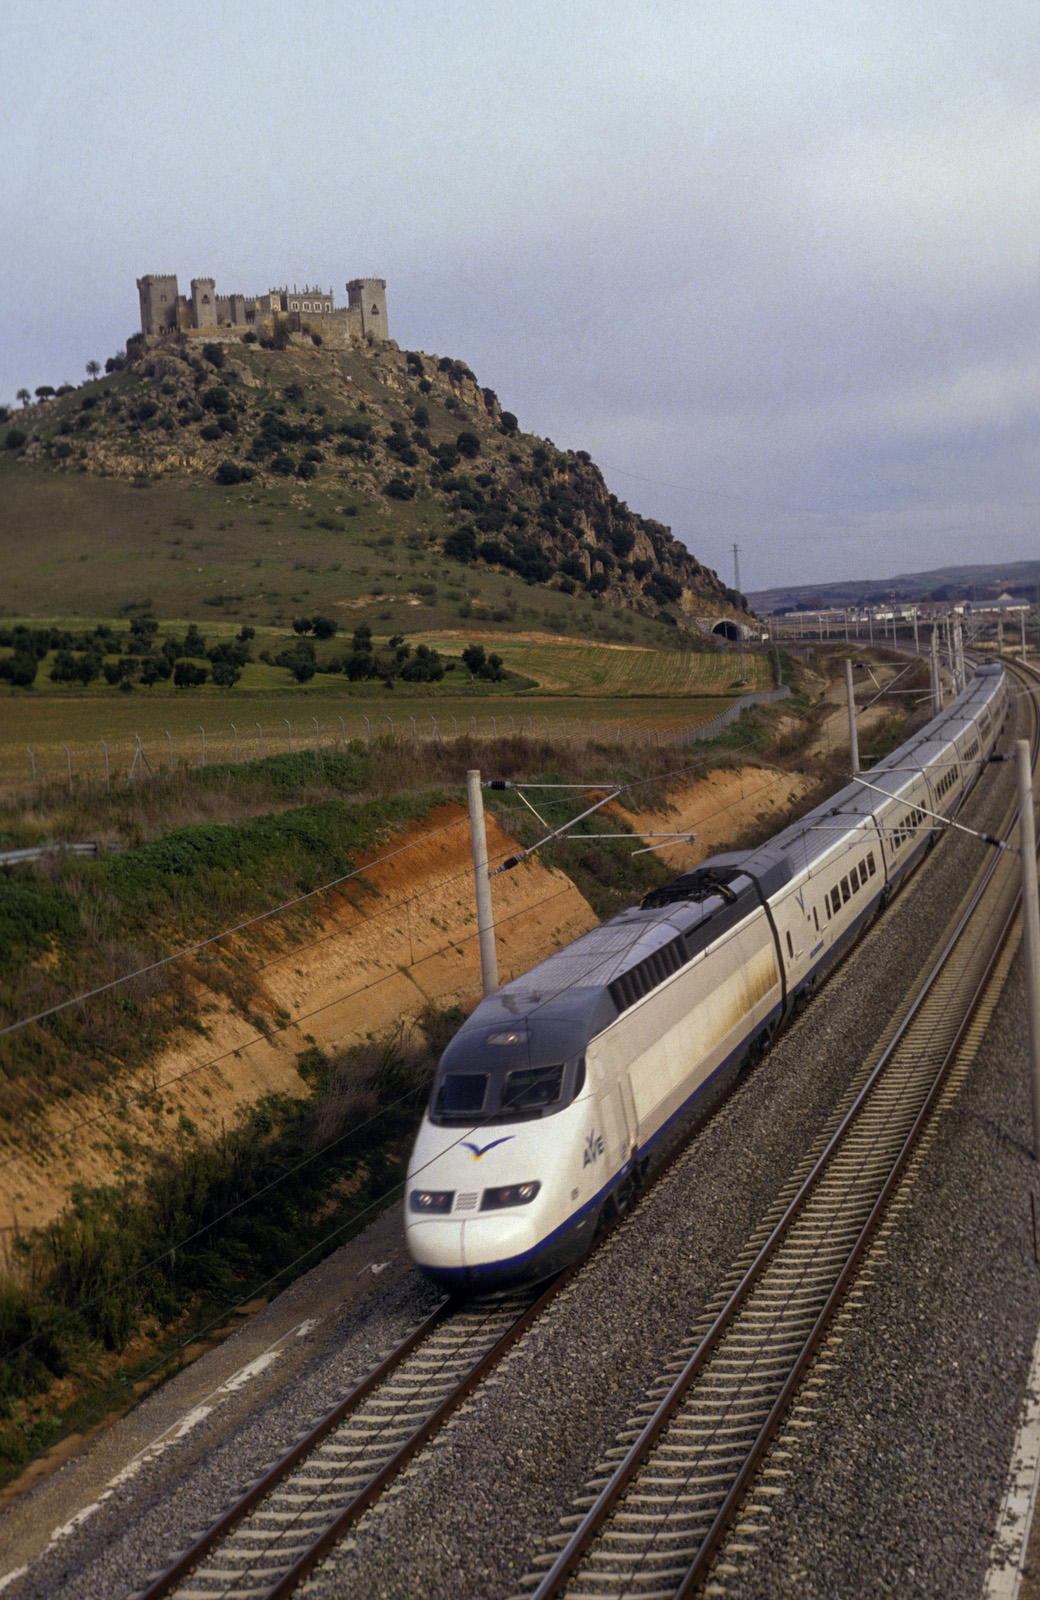 A high-speed train comes down the track around an outcropping with the ruins of a castle